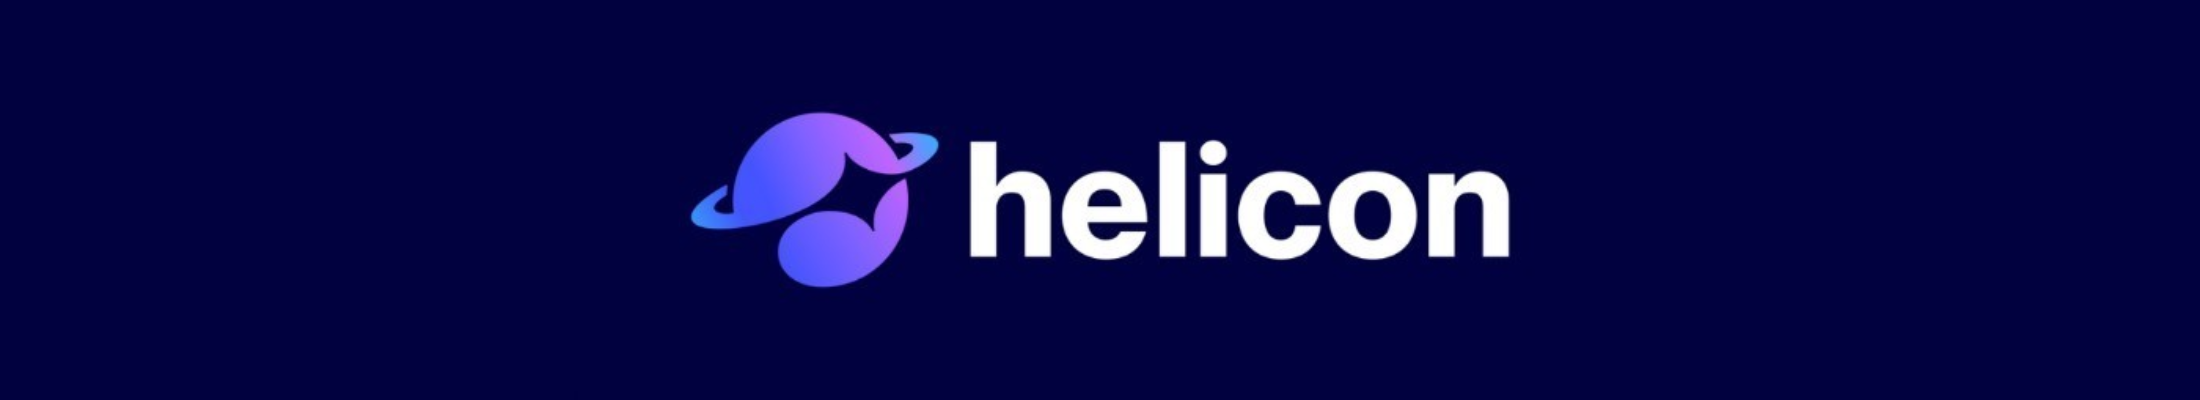 Helicon Technologies AB